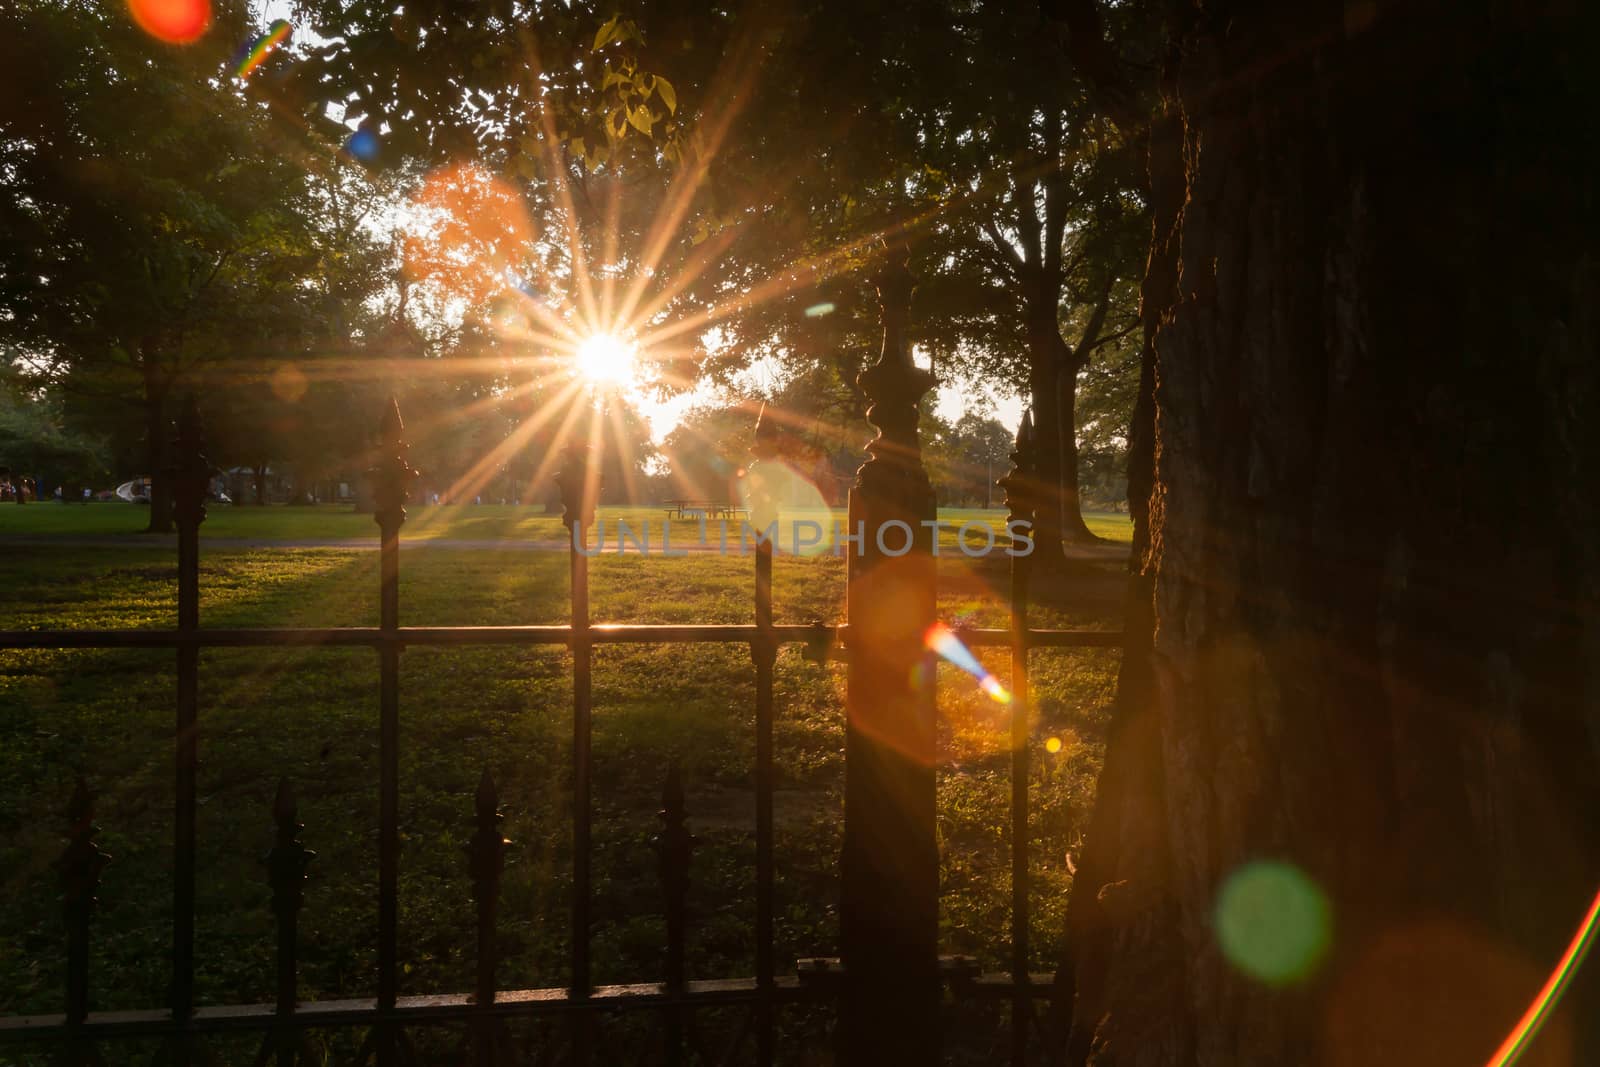 Long shadows through wrought iron fence surrounding La Fayette Park with lens flare aged photo effect and haze at sunset  St Louis Missouri USA